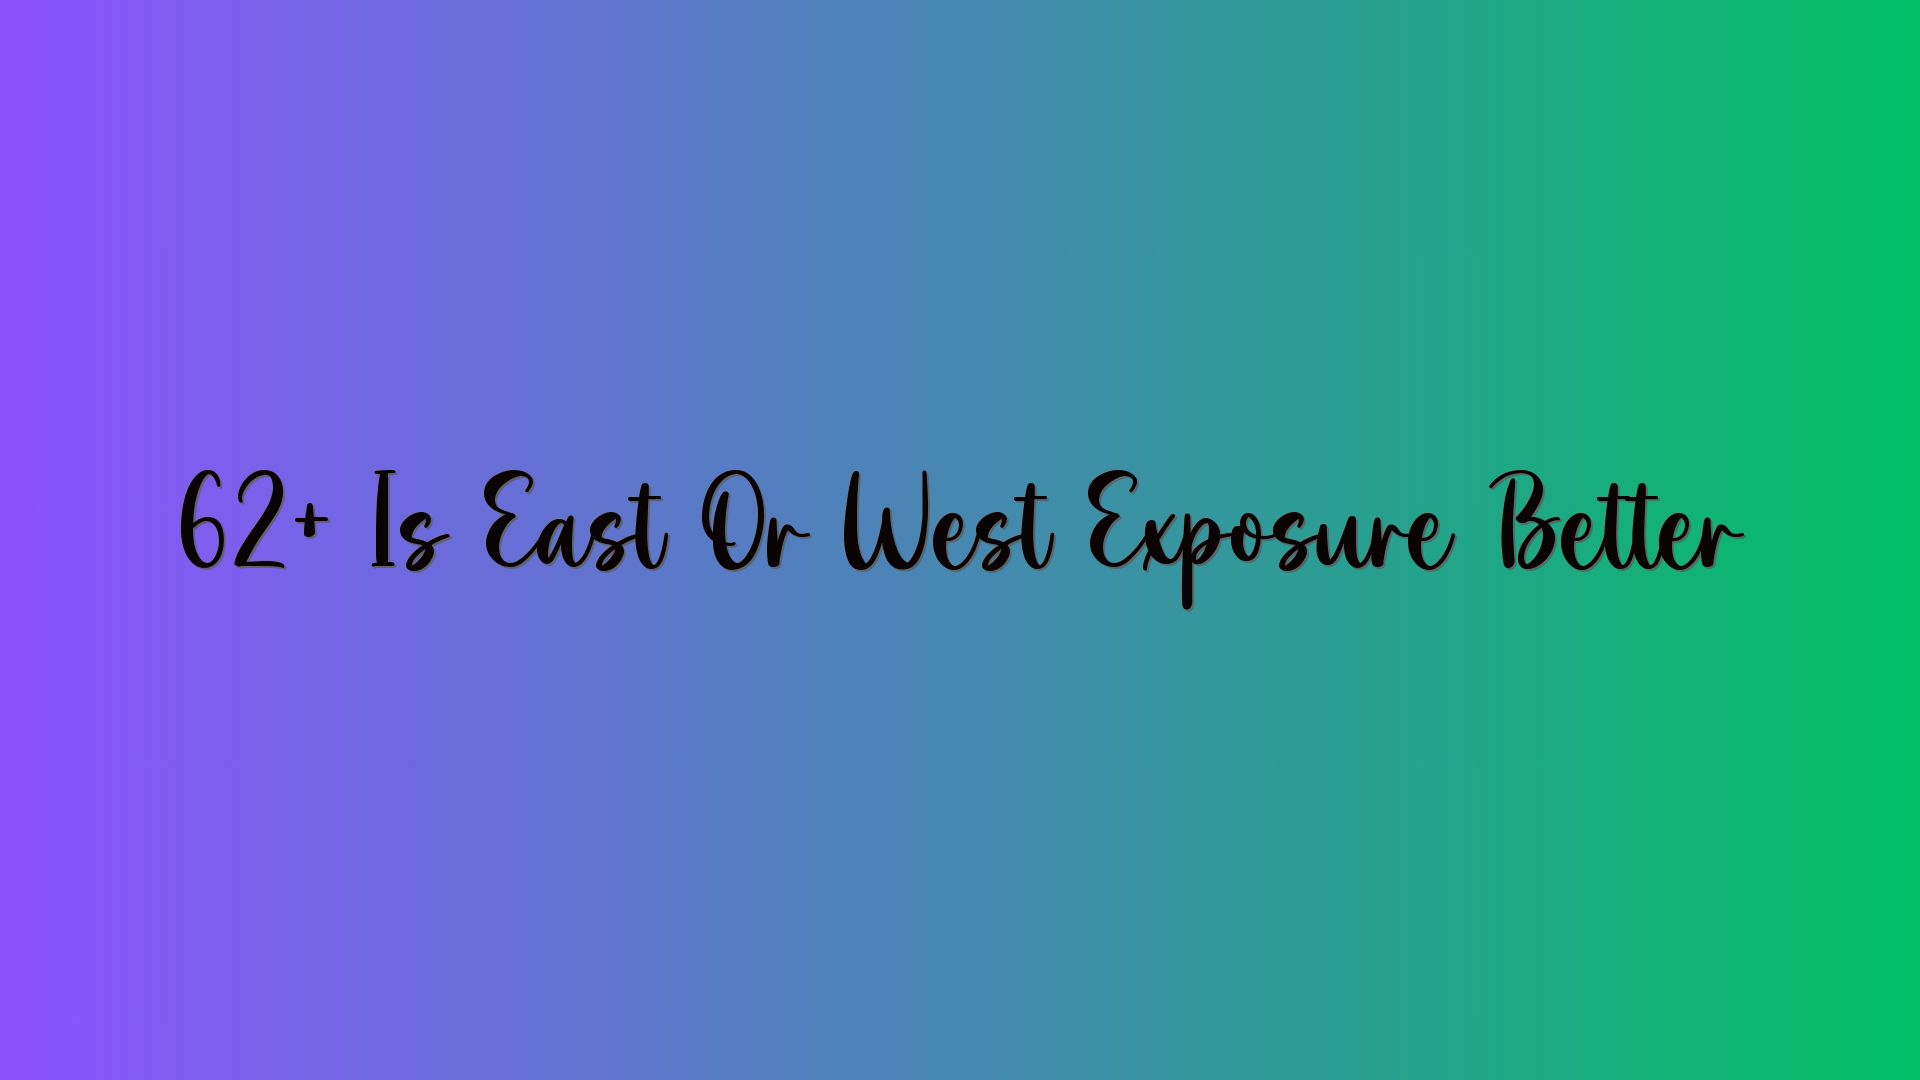 62+ Is East Or West Exposure Better